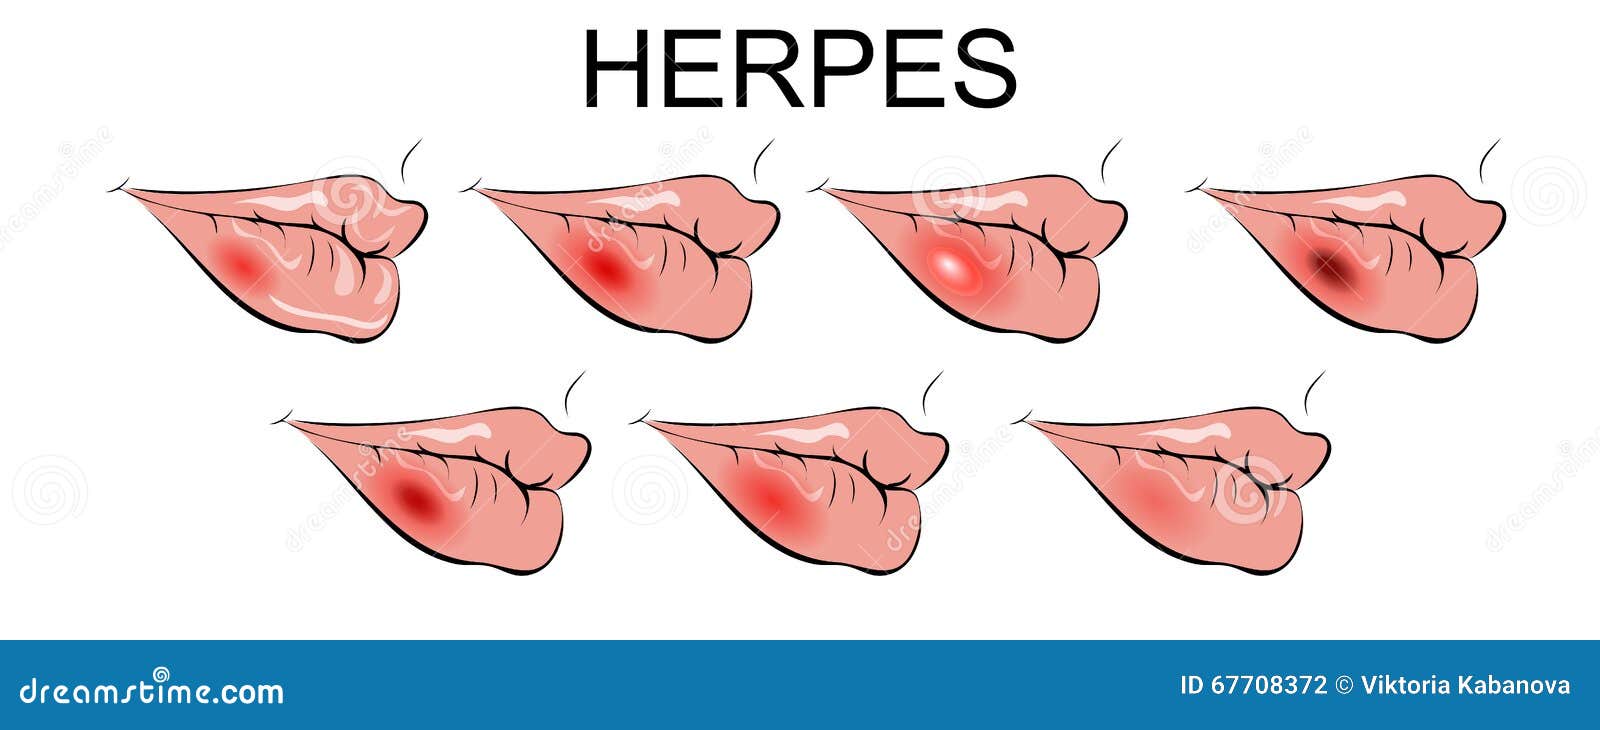 Herpes Mouth Pictures, Images & Photos | Photobucket